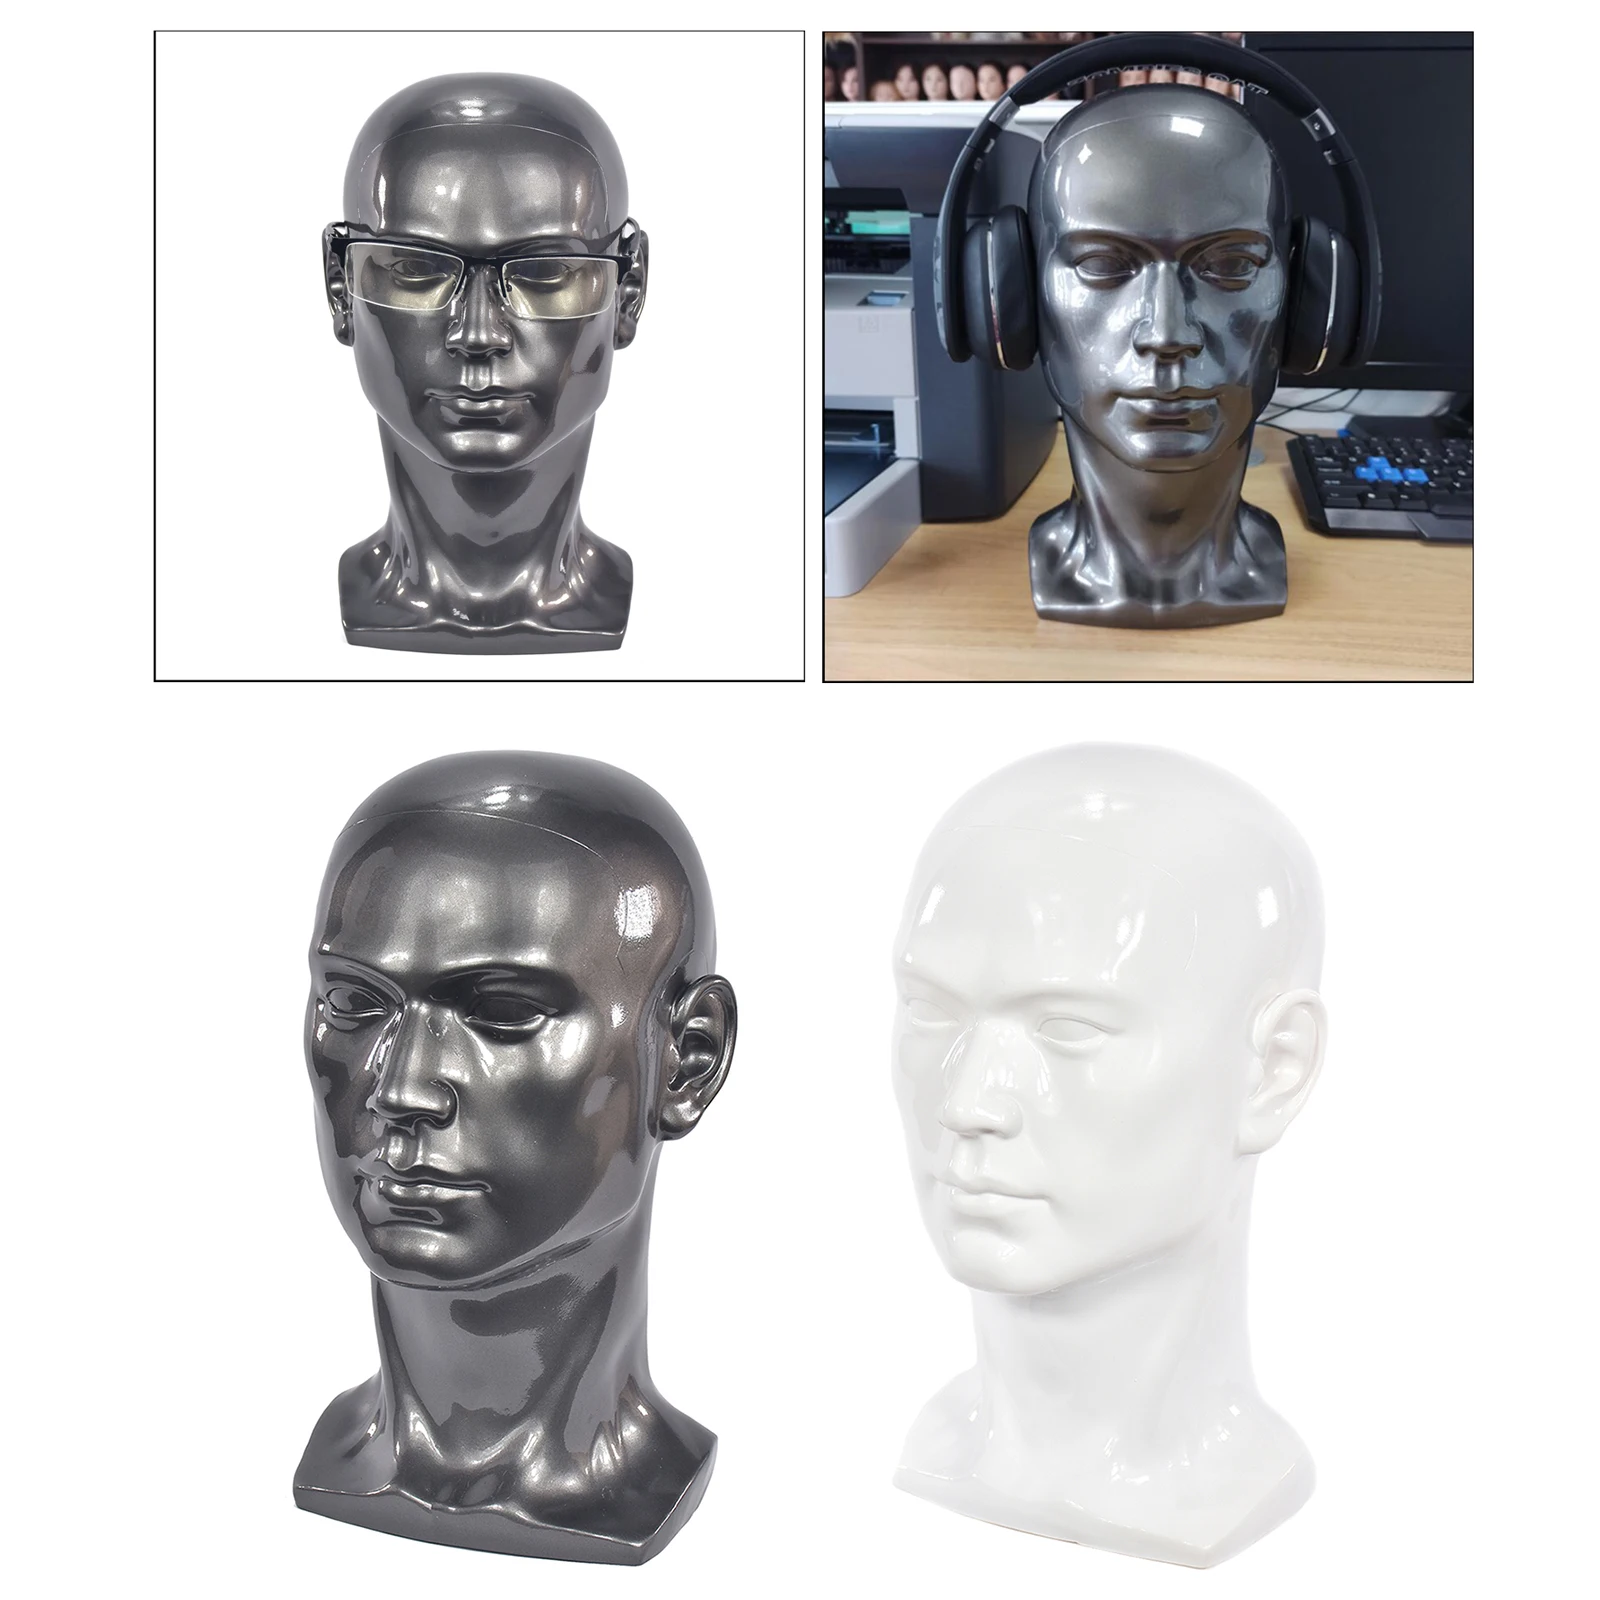 Realistic Fiberglass Male Mannequin Head Aliexpress For Wigs And Hat  Display272R From Bvfd567, $116.17